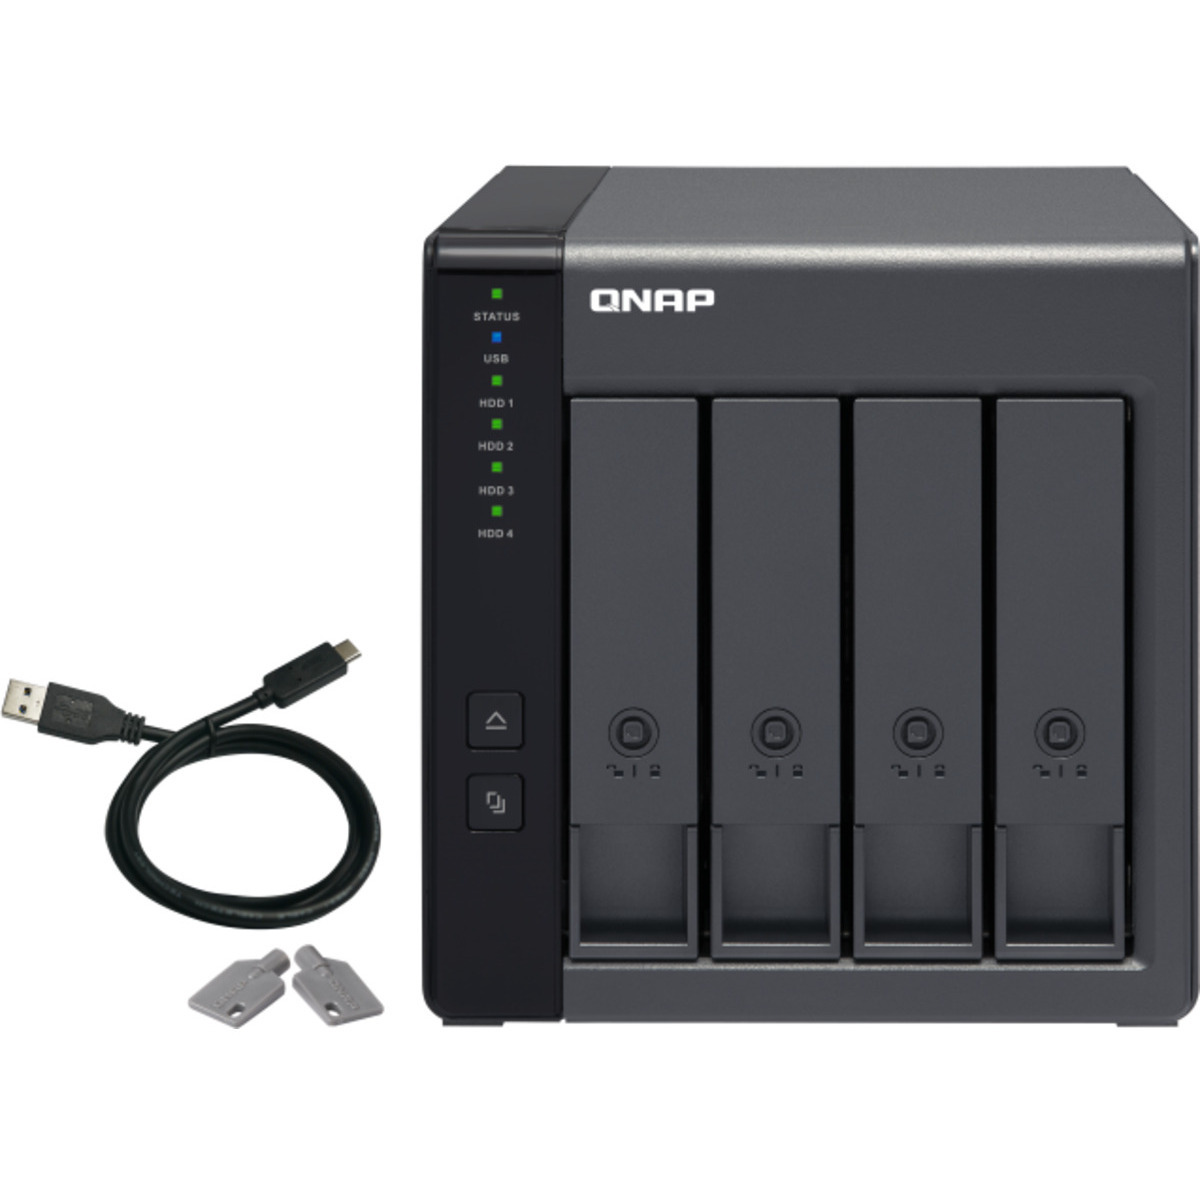 buy $2057 QNAP TR-004 External Expansion Drive 72tb Desktop Expansion Enclosure 4x18000gb Toshiba Enterprise Capacity MG09ACA18TE 3.5 7200rpm SATA 6Gb/s HDD ENTERPRISE Class Drives Installed - Burn-In Tested - nas headquarters buy network attached storage server device das new raid-5 free shipping usa christmas new year holiday sale TR-004 External Expansion Drive